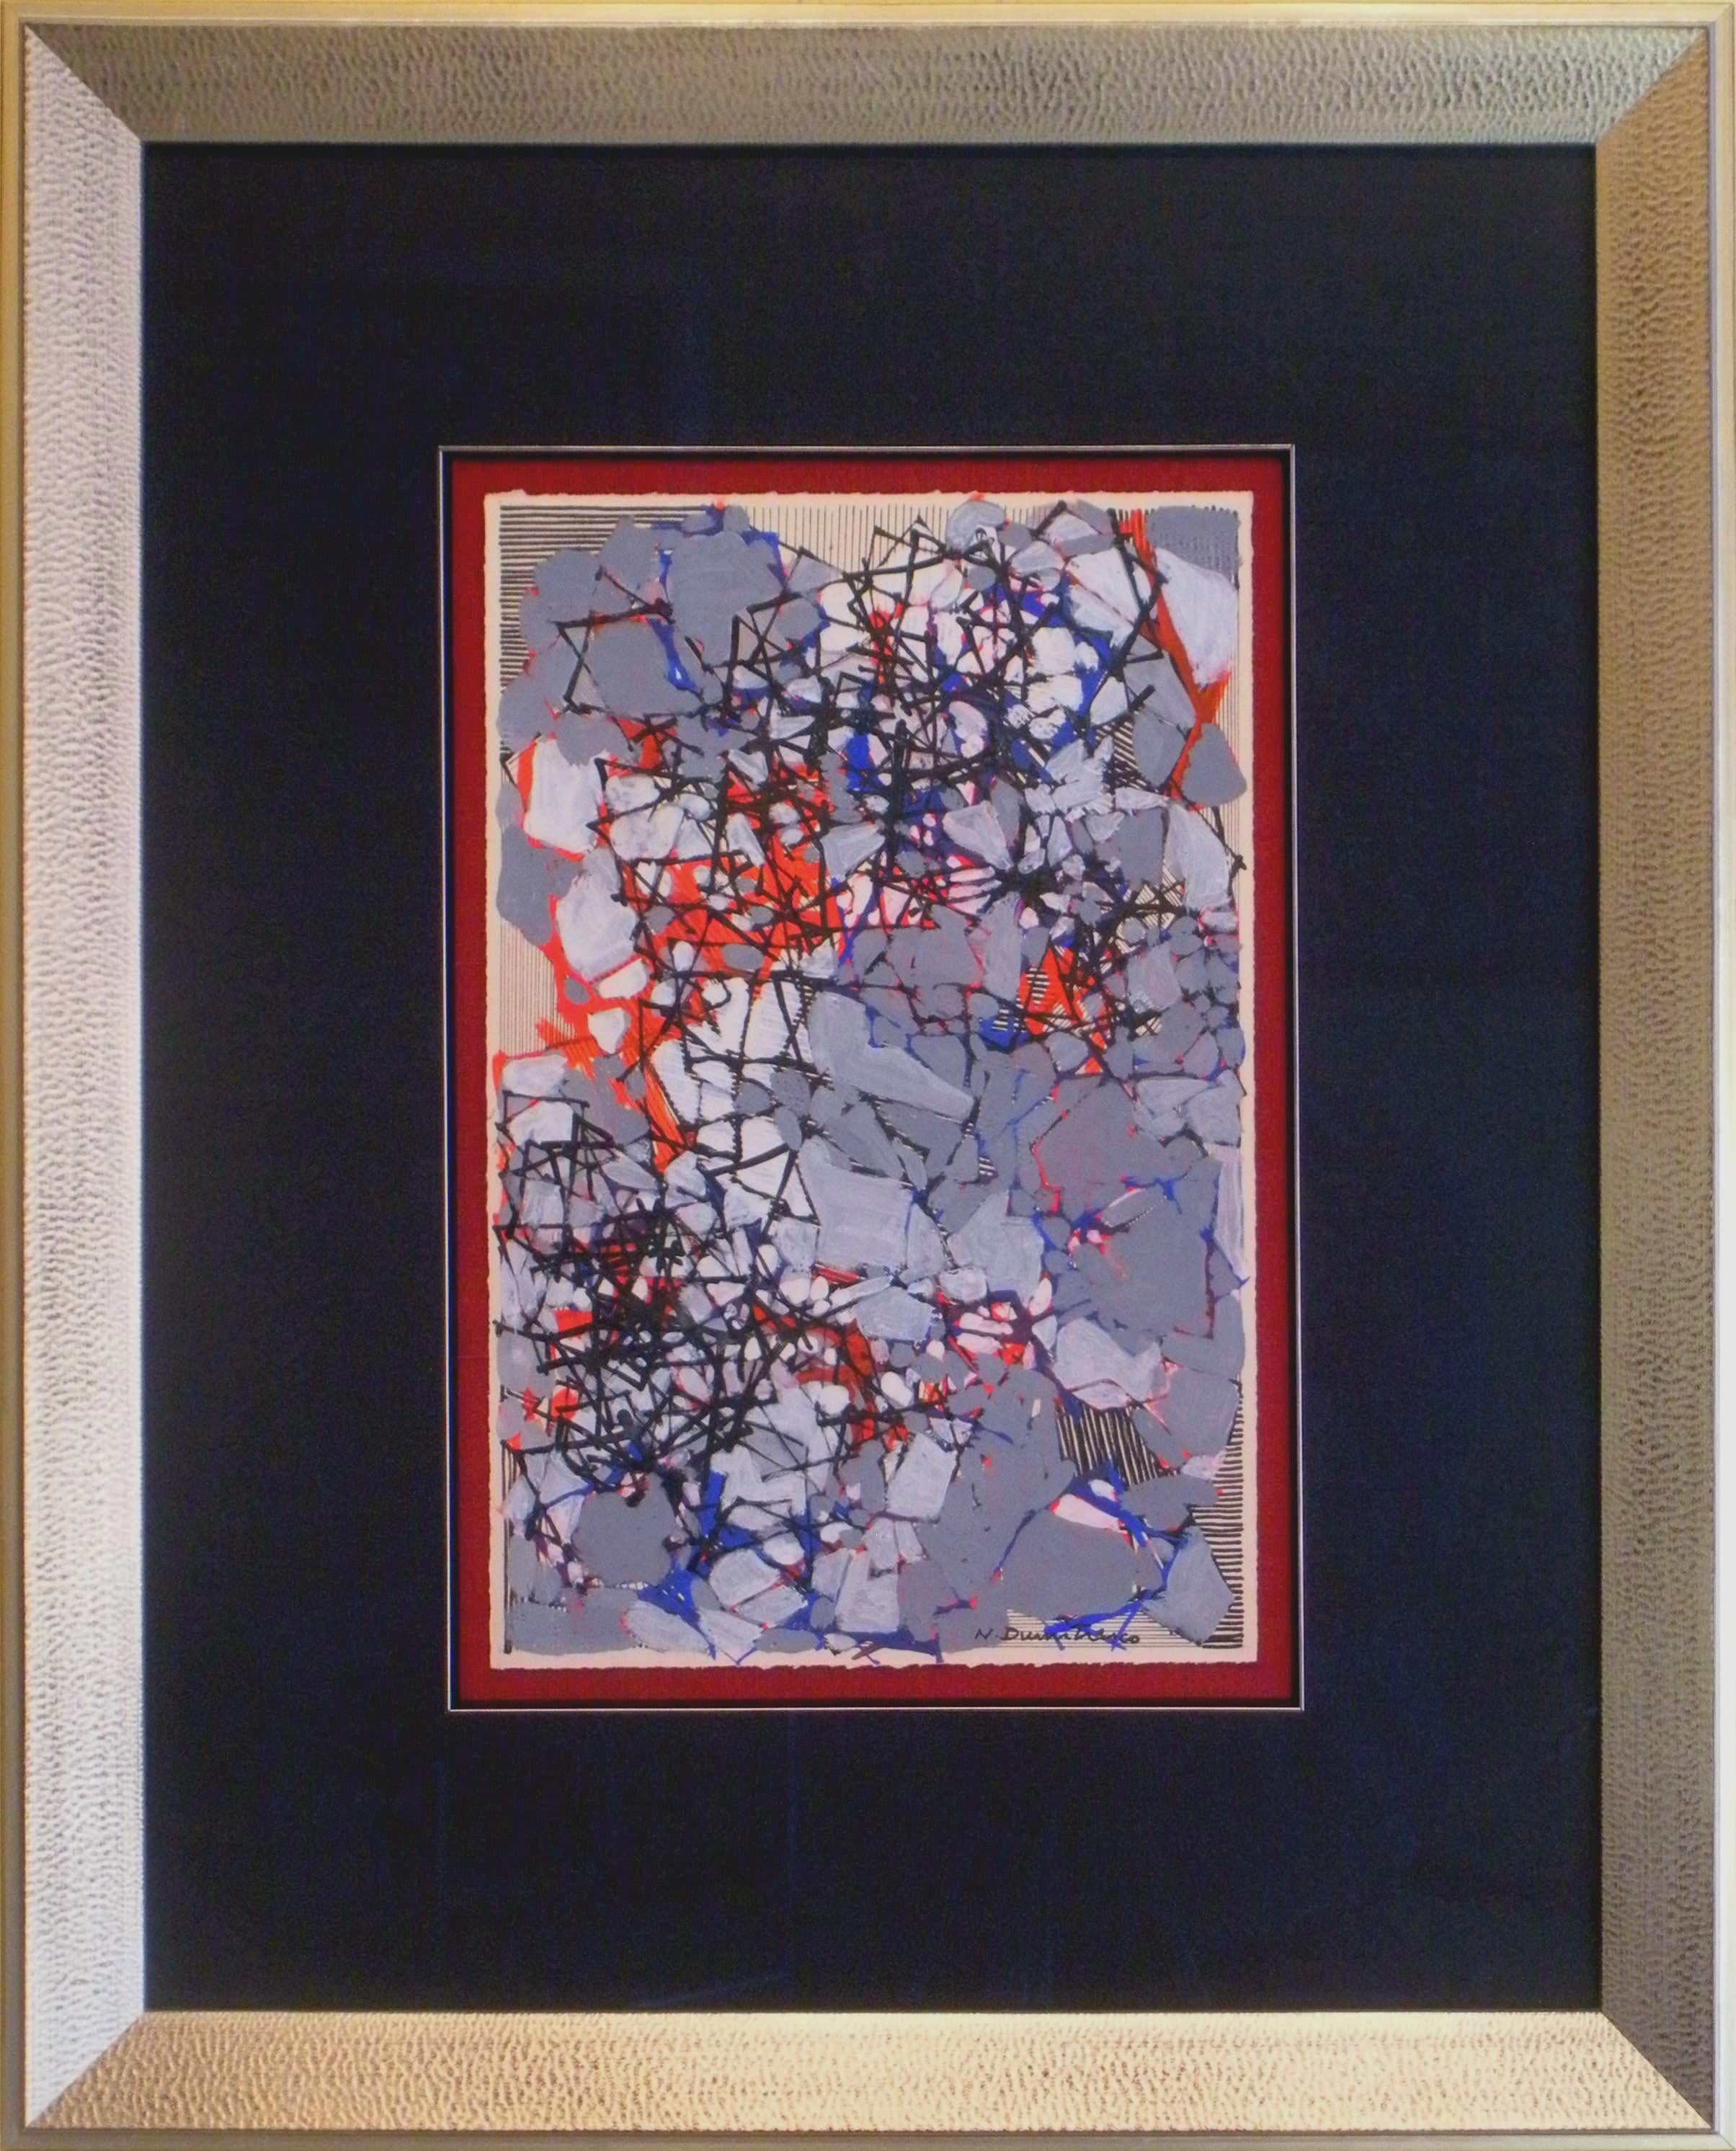 This vertical gouache and ink painting shows the quintessential lyric abstract style of Natalia Dumitresco.  The vivid reds and subdued blues and grays create a tension that makes the work quite engaging. This work is matted in dark blue and framed